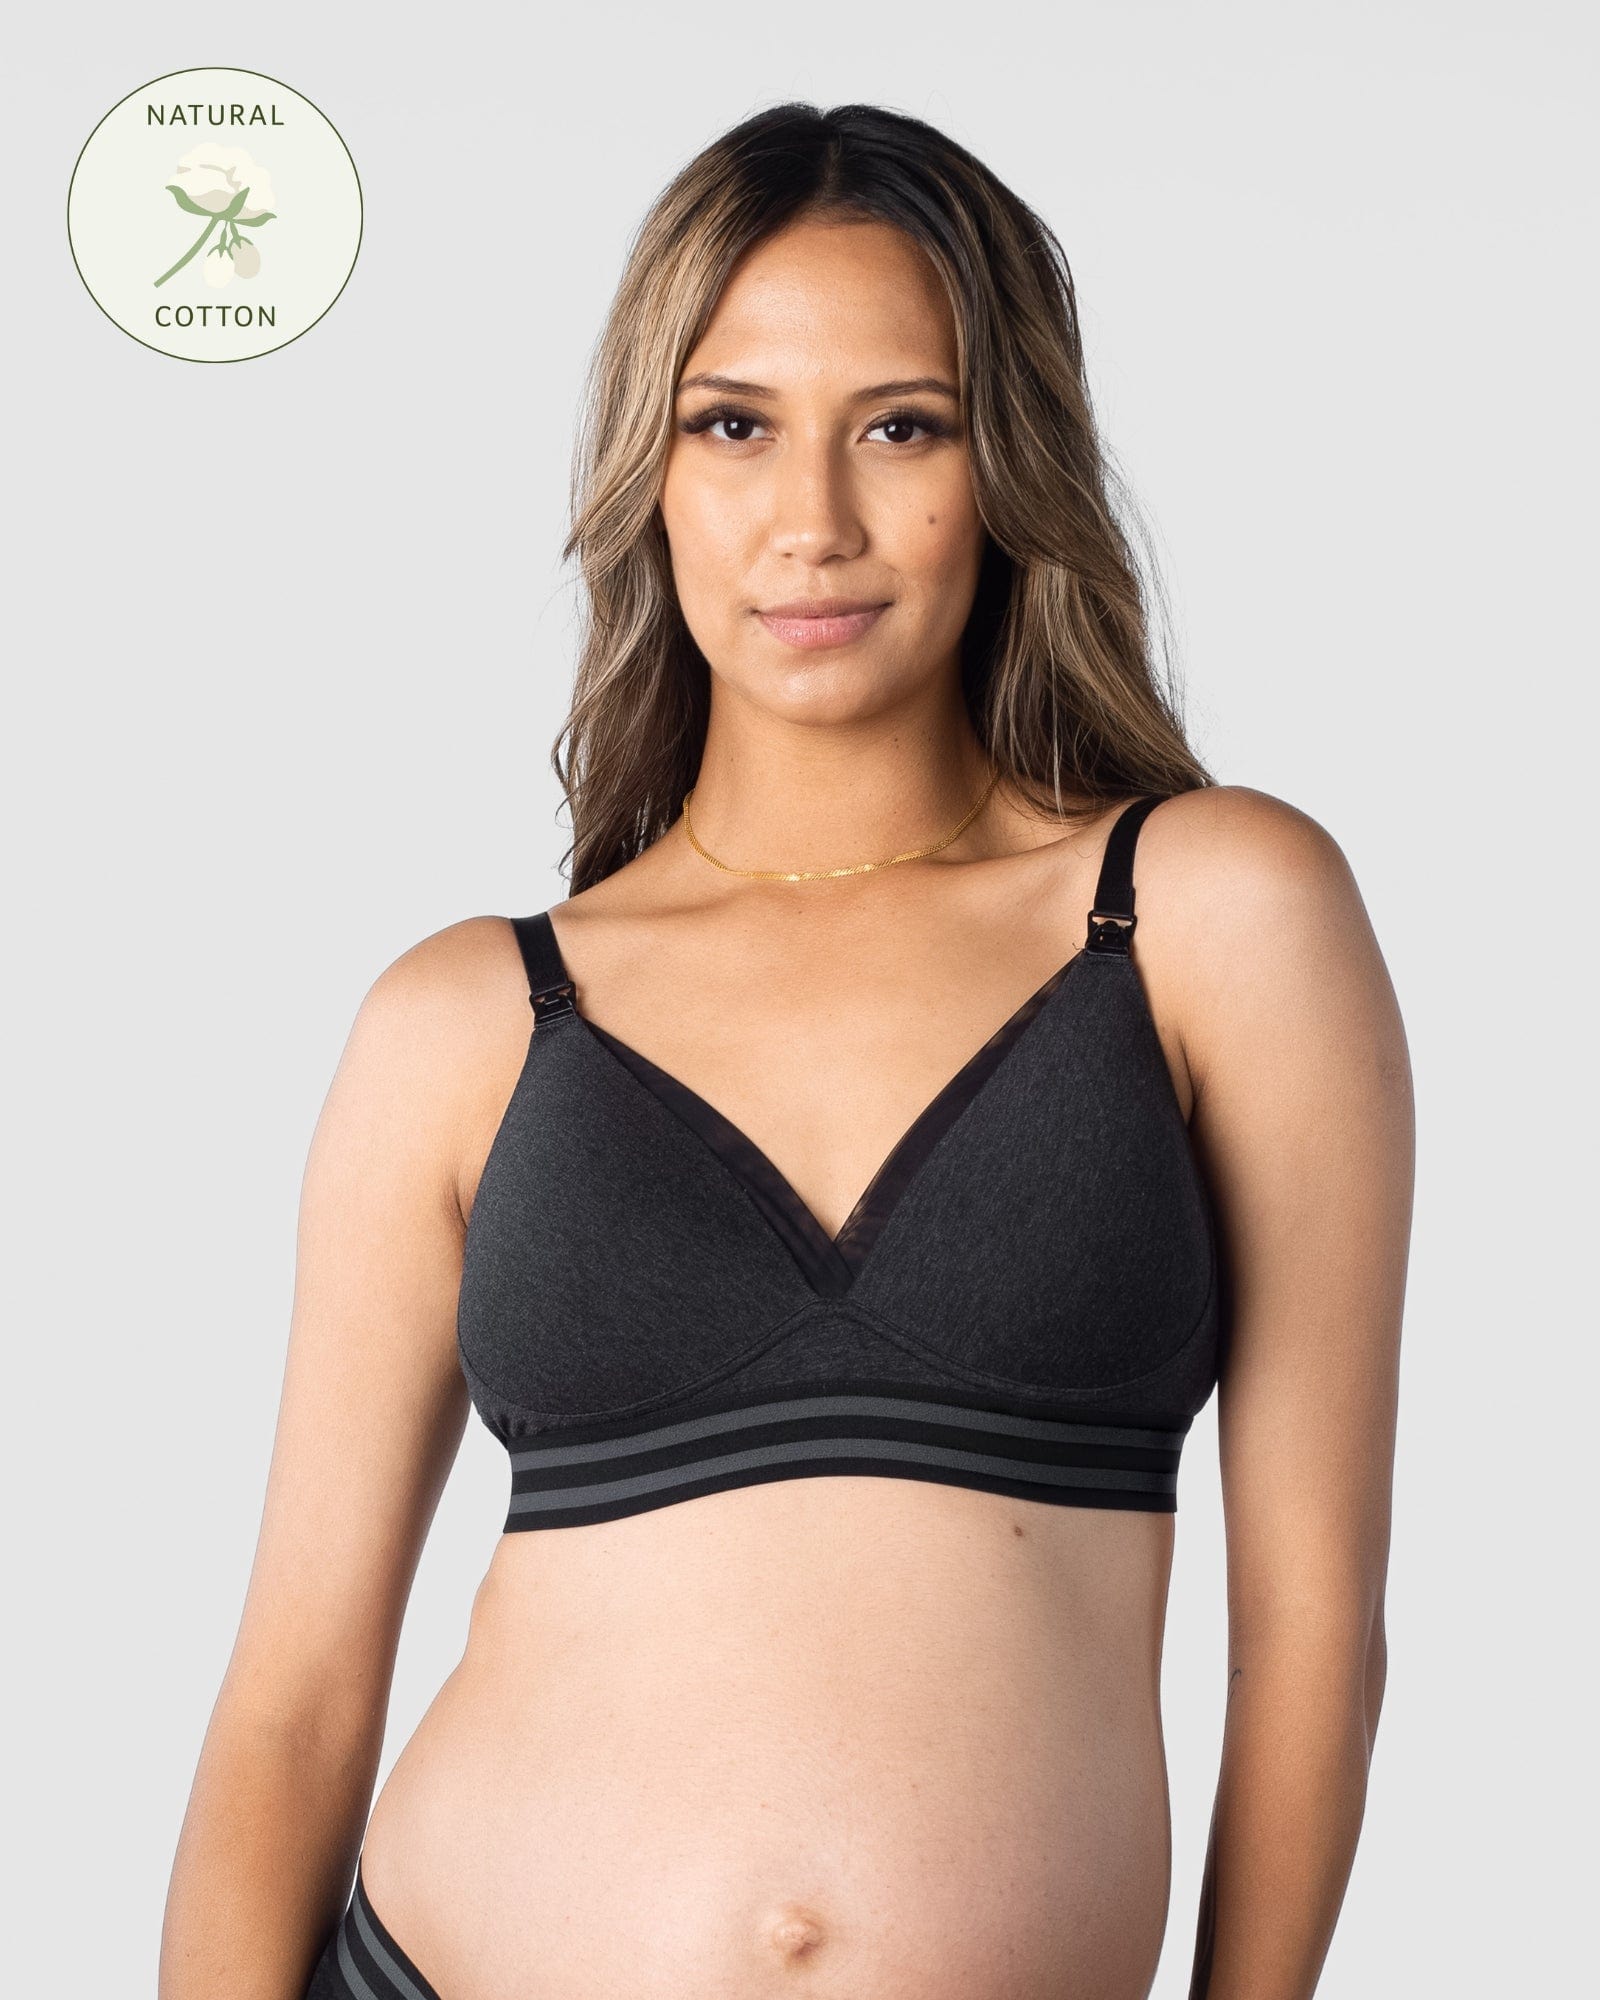 Buy FURN ASPIRE Premium Cotton Nursing Bras for Breastfeeding with Front  Button Closure Seamless Ultra Comfort Wirefree Light Padded Maternity  Bralette with Extra Bra Extenders. Green at